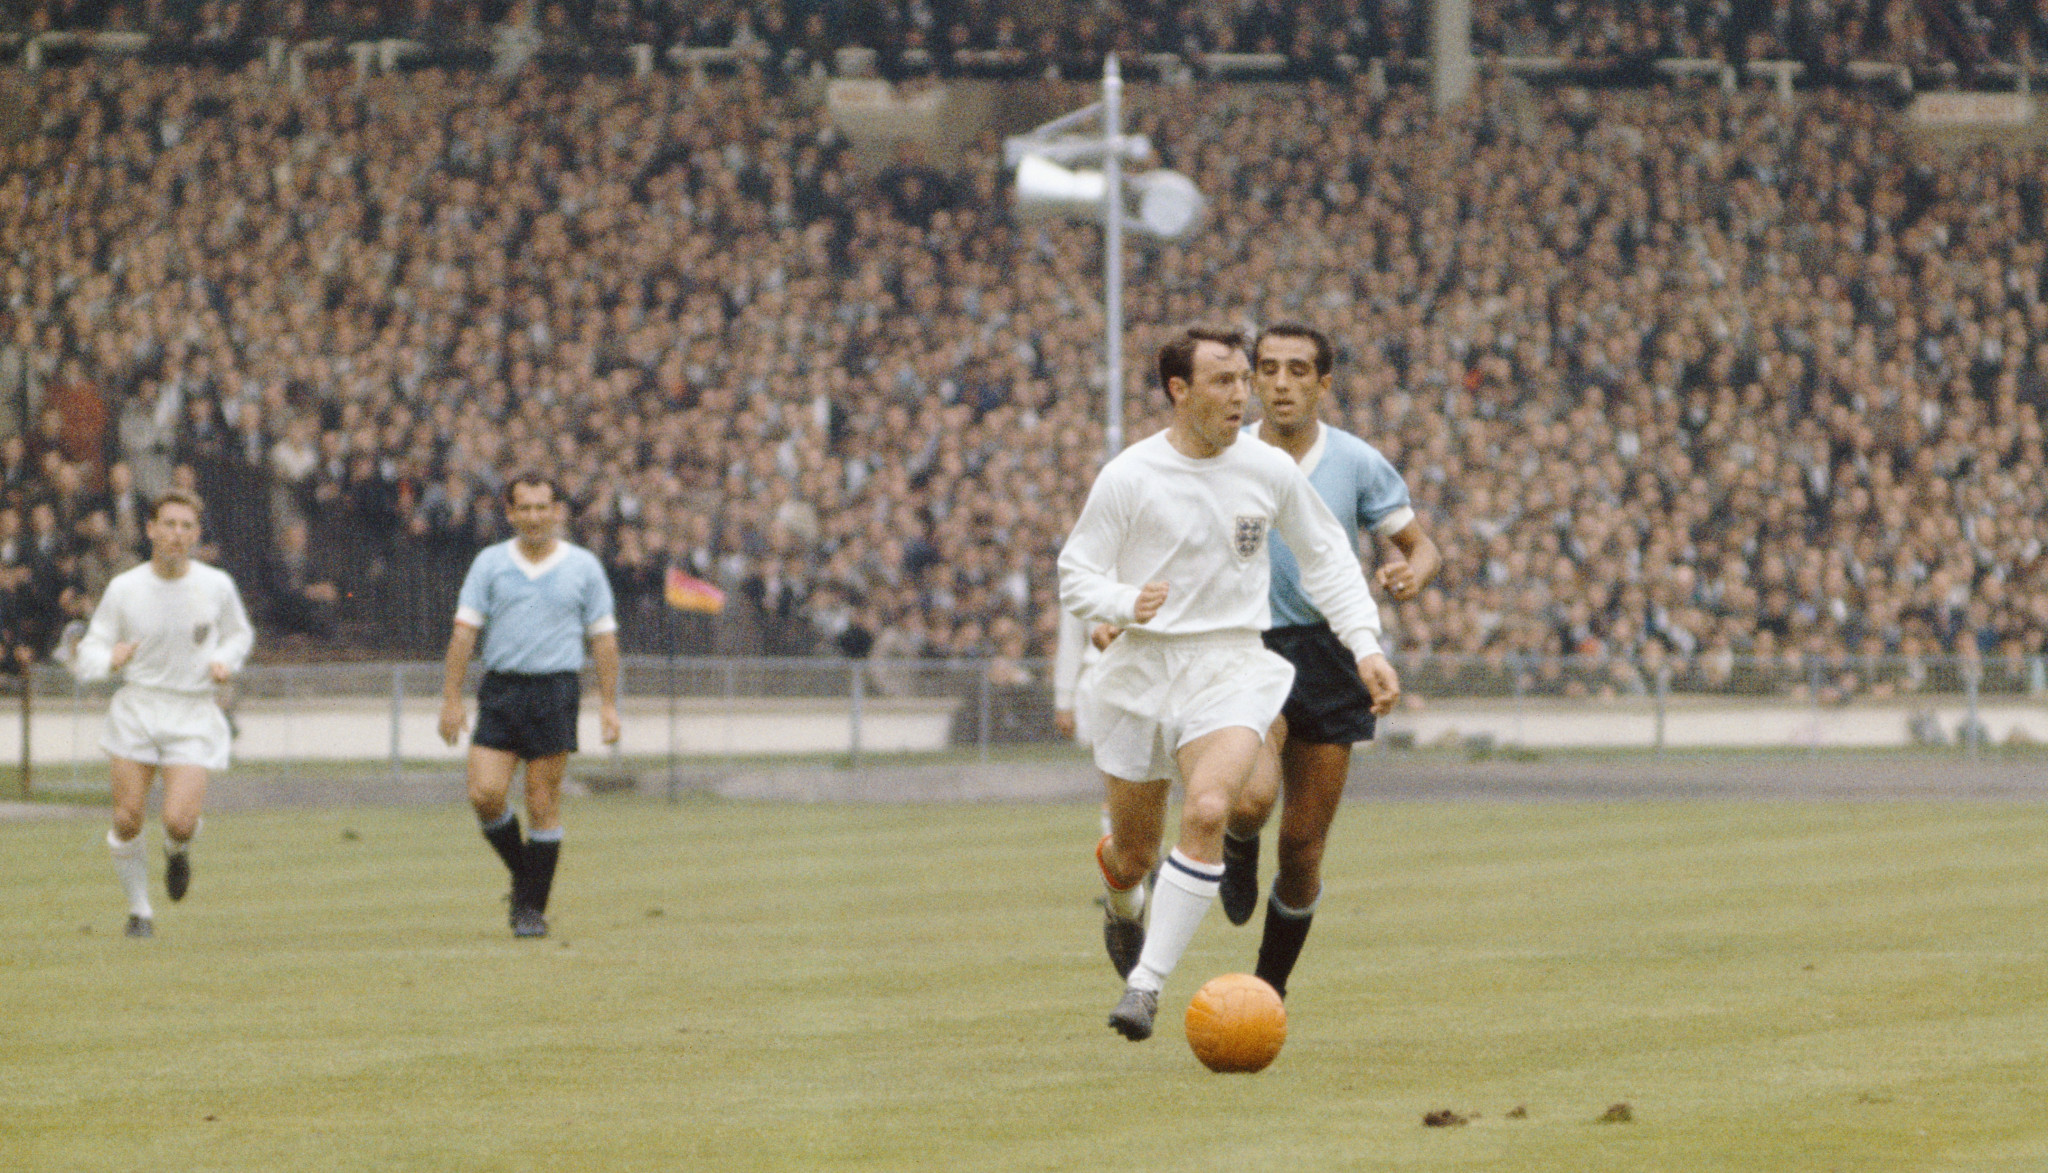 Jimmy Greaves started the 1966 FIFA World Cup as England's number one striker but got injured and never played in the tournament as his replacement scored a hat-trick in the final ©Getty Images